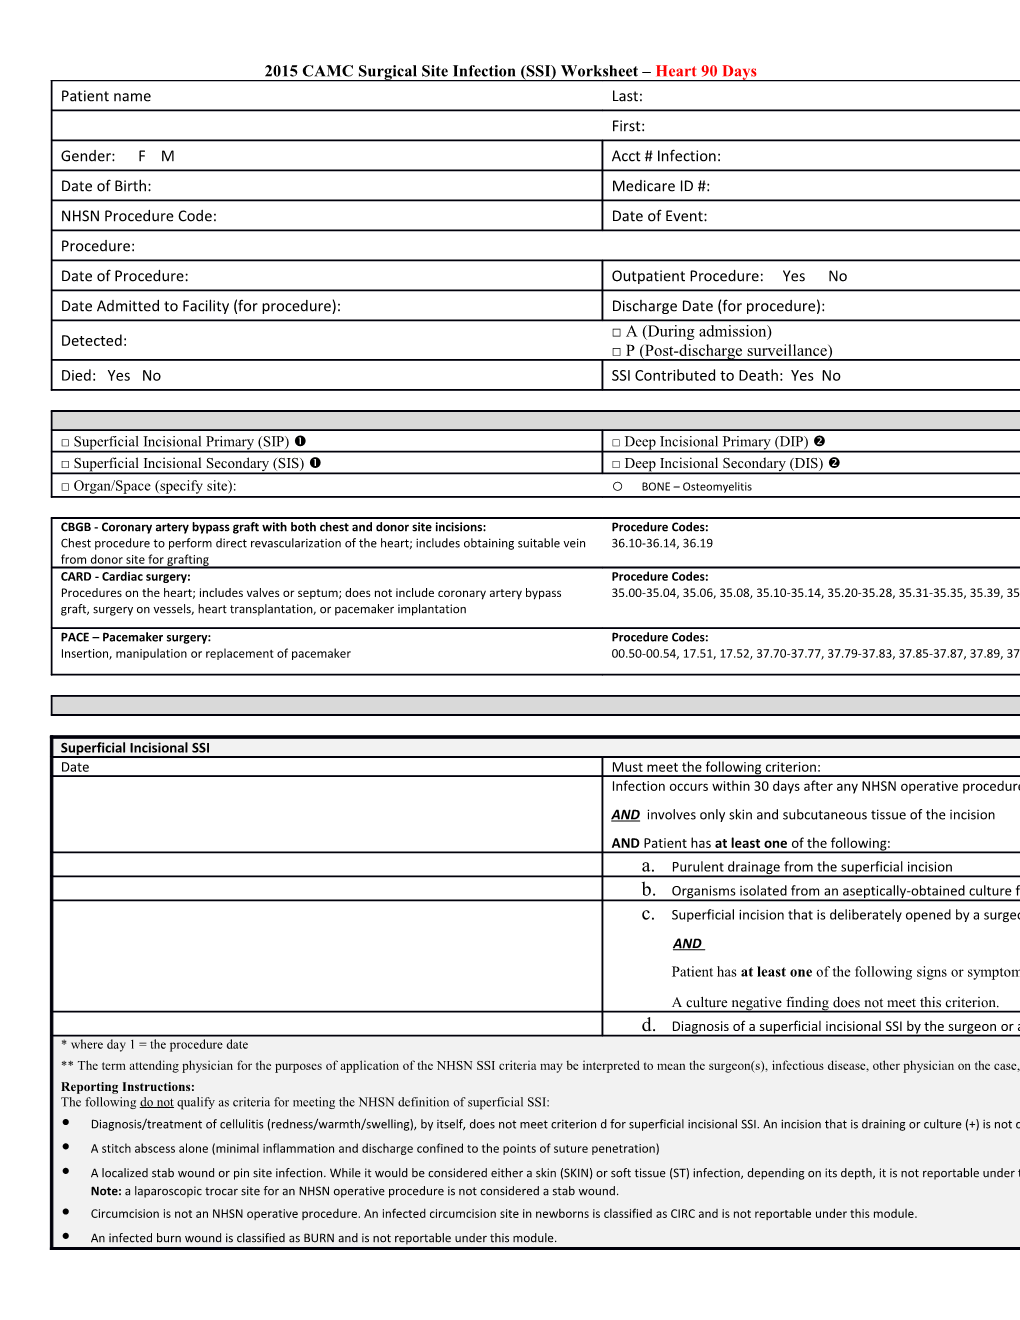 2015 CAMC Surgical Site Infection (SSI) Worksheet Heart 90 Days